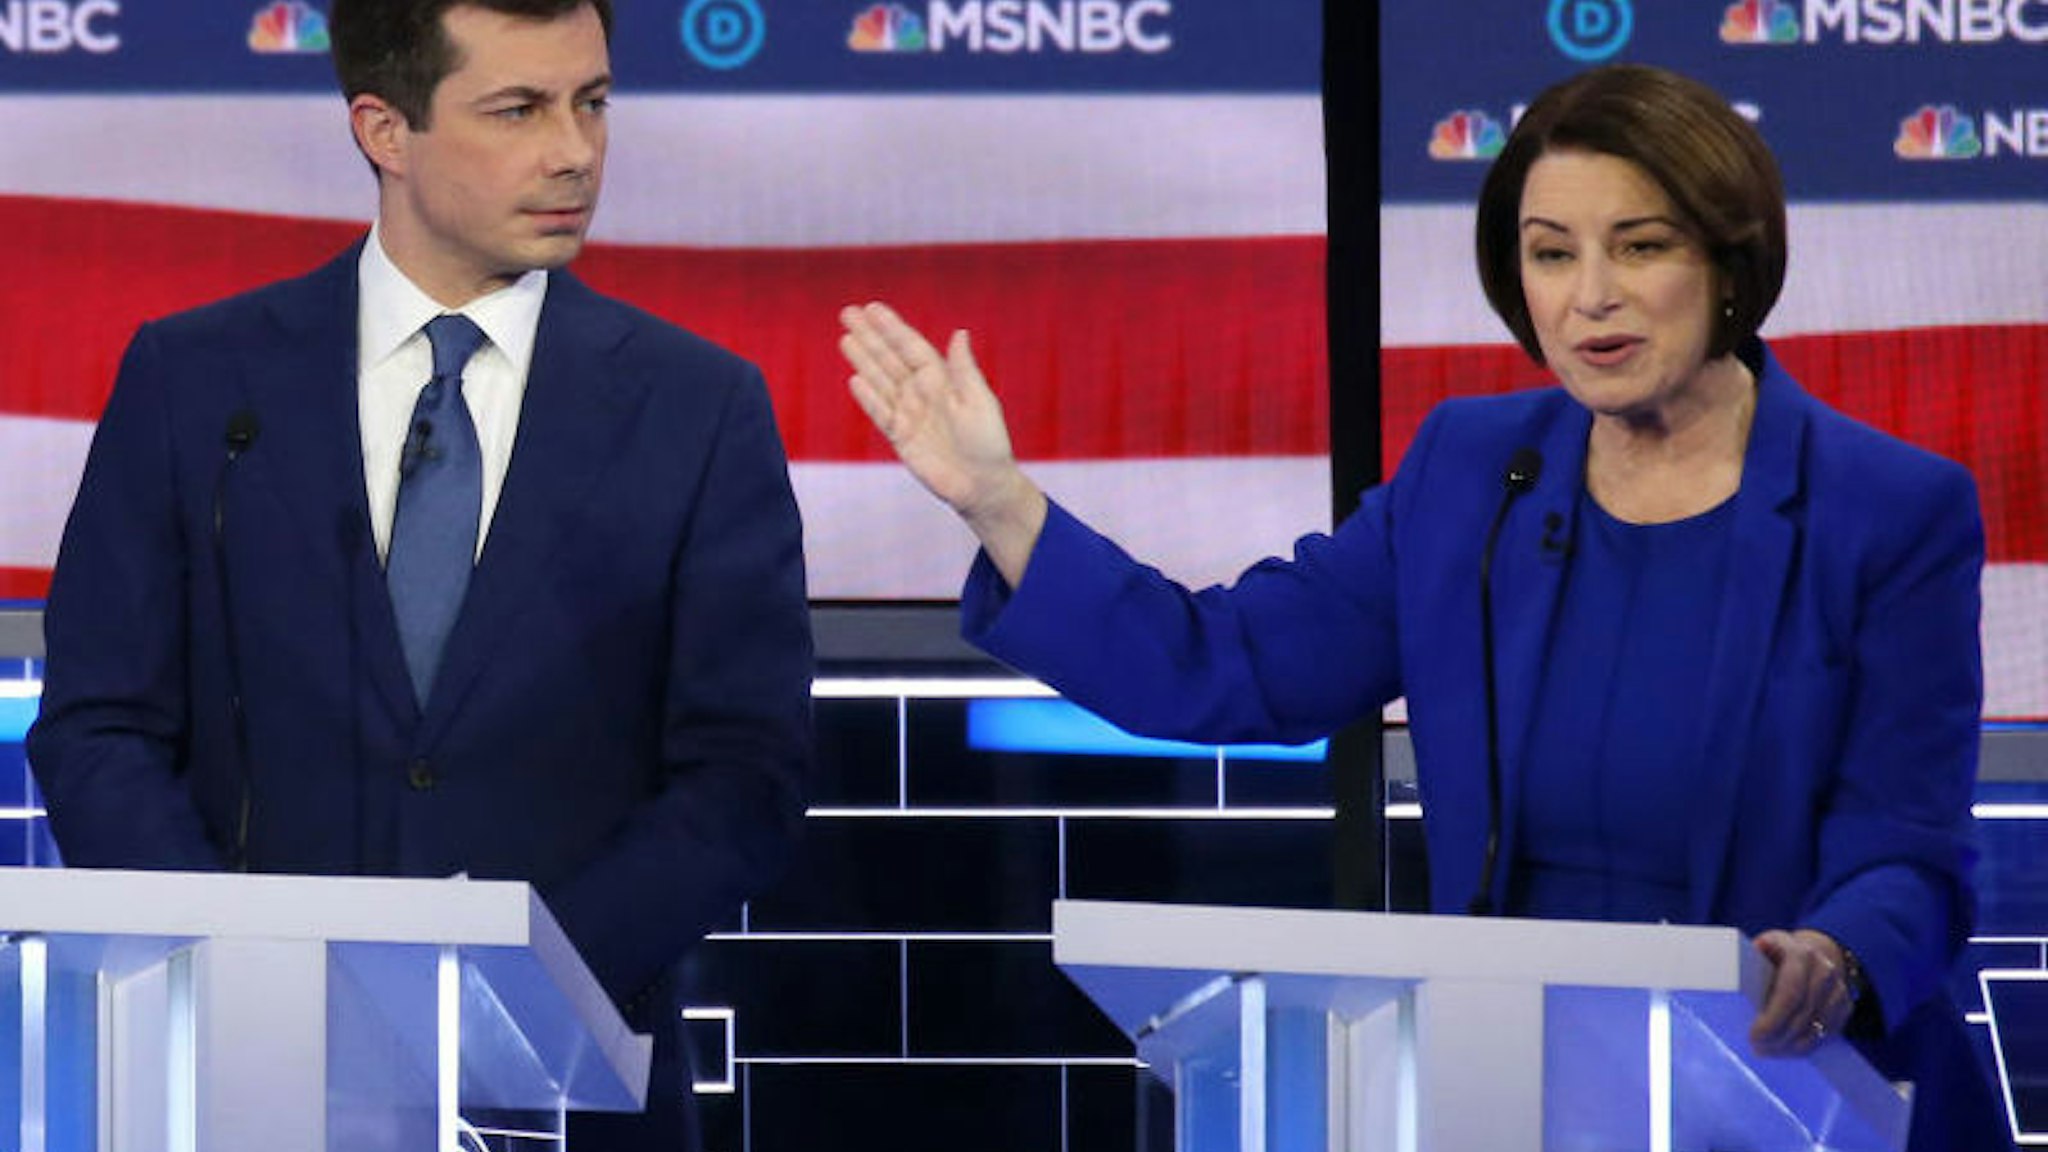 LAS VEGAS, NEVADA - FEBRUARY 19: Democratic presidential candidate former South Bend, Indiana Mayor Pete Buttigieg (L) and Sen. Amy Klobuchar (D-MN) participate in the Democratic presidential primary debate at Paris Las Vegas on February 19, 2020 in Las Vegas, Nevada. Six candidates qualified for the third Democratic presidential primary debate of 2020, which comes just days before the Nevada caucuses on February 22.